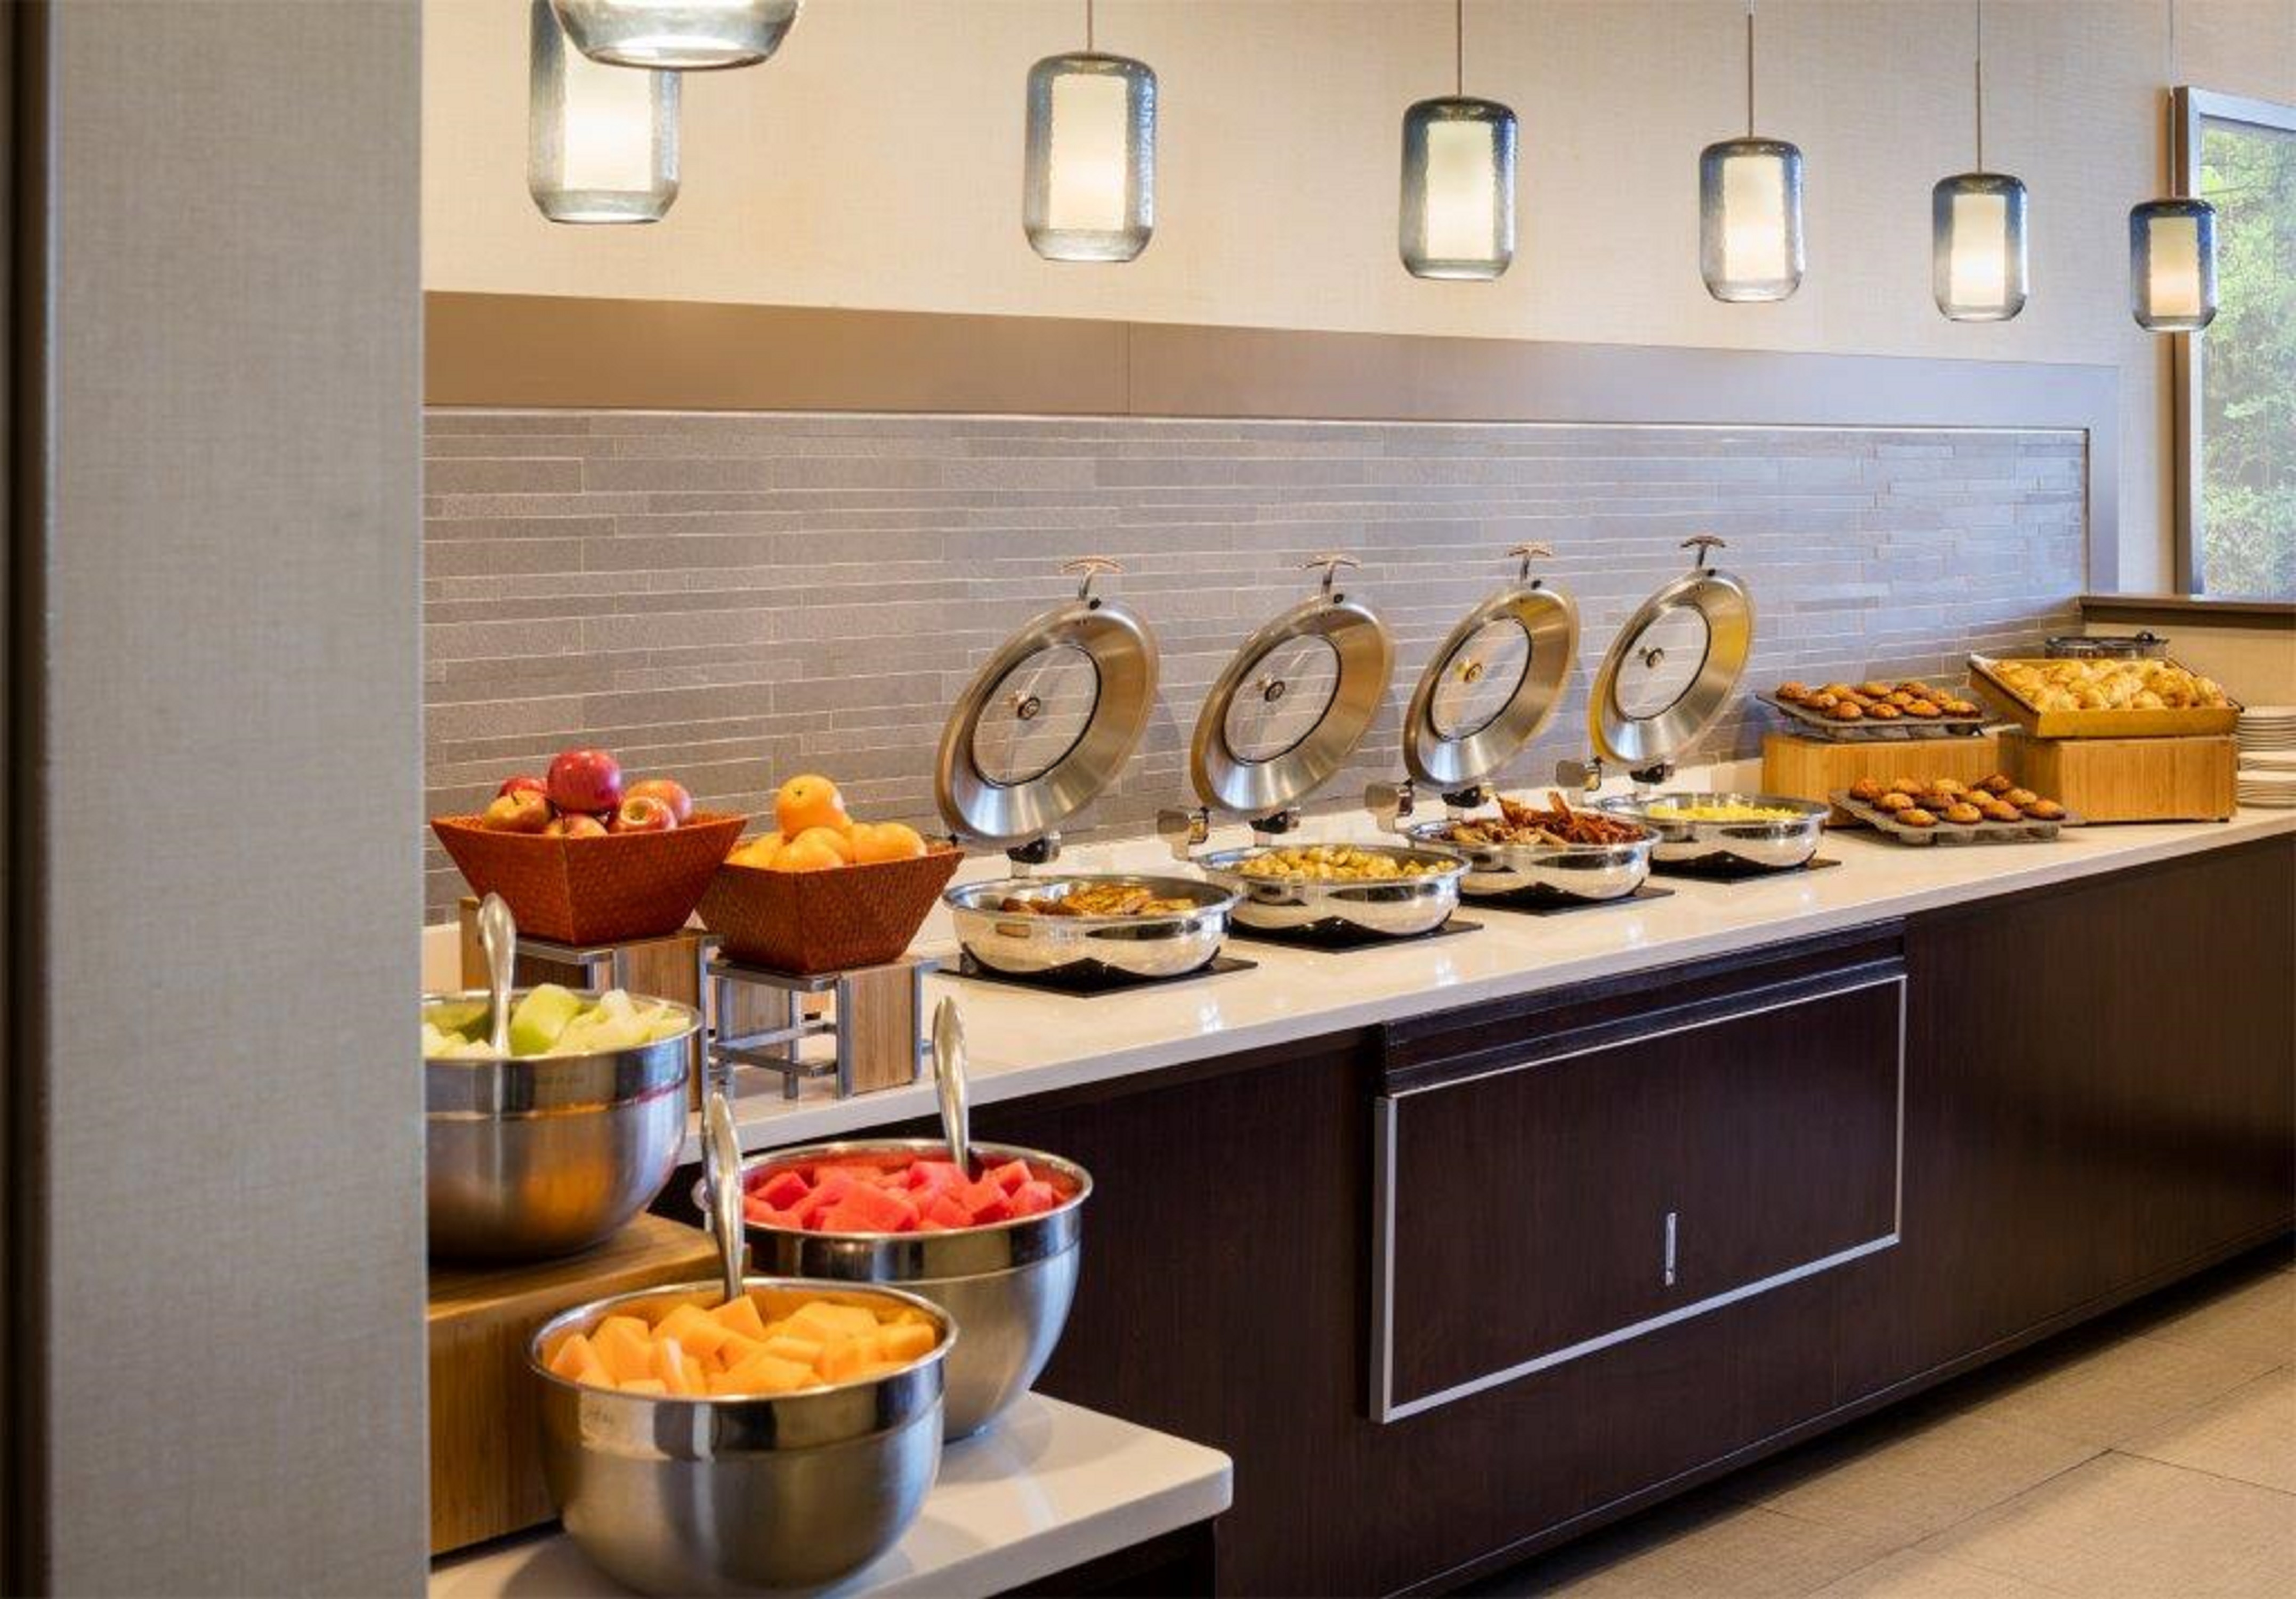 Breakfast Buffet with Fruits Breads and Hot Food Area